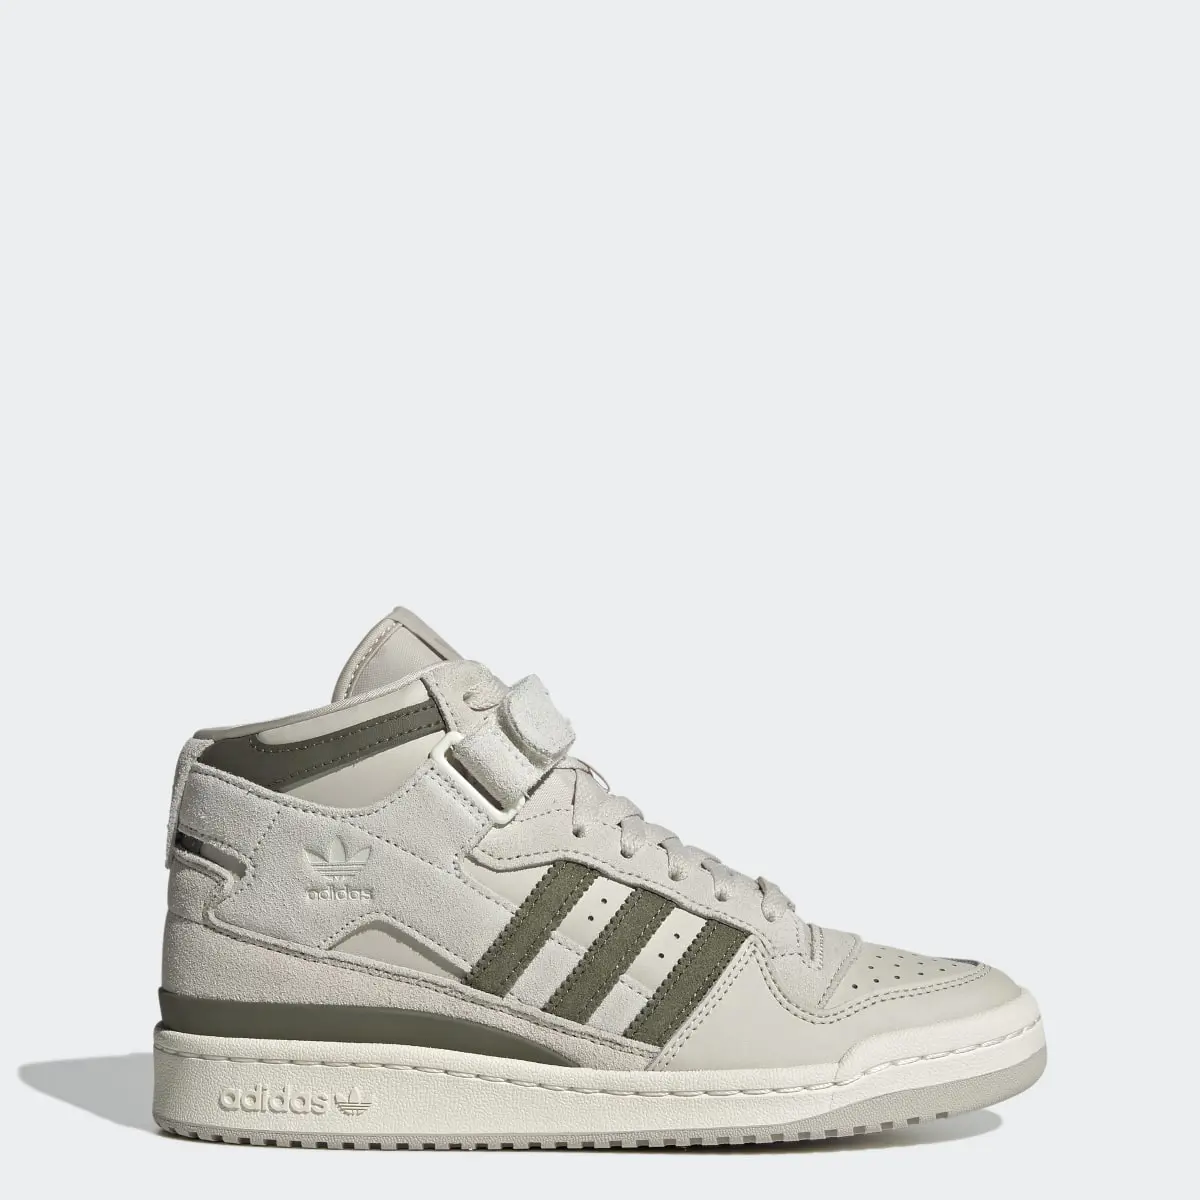 Adidas Forum Mid Shoes. 1